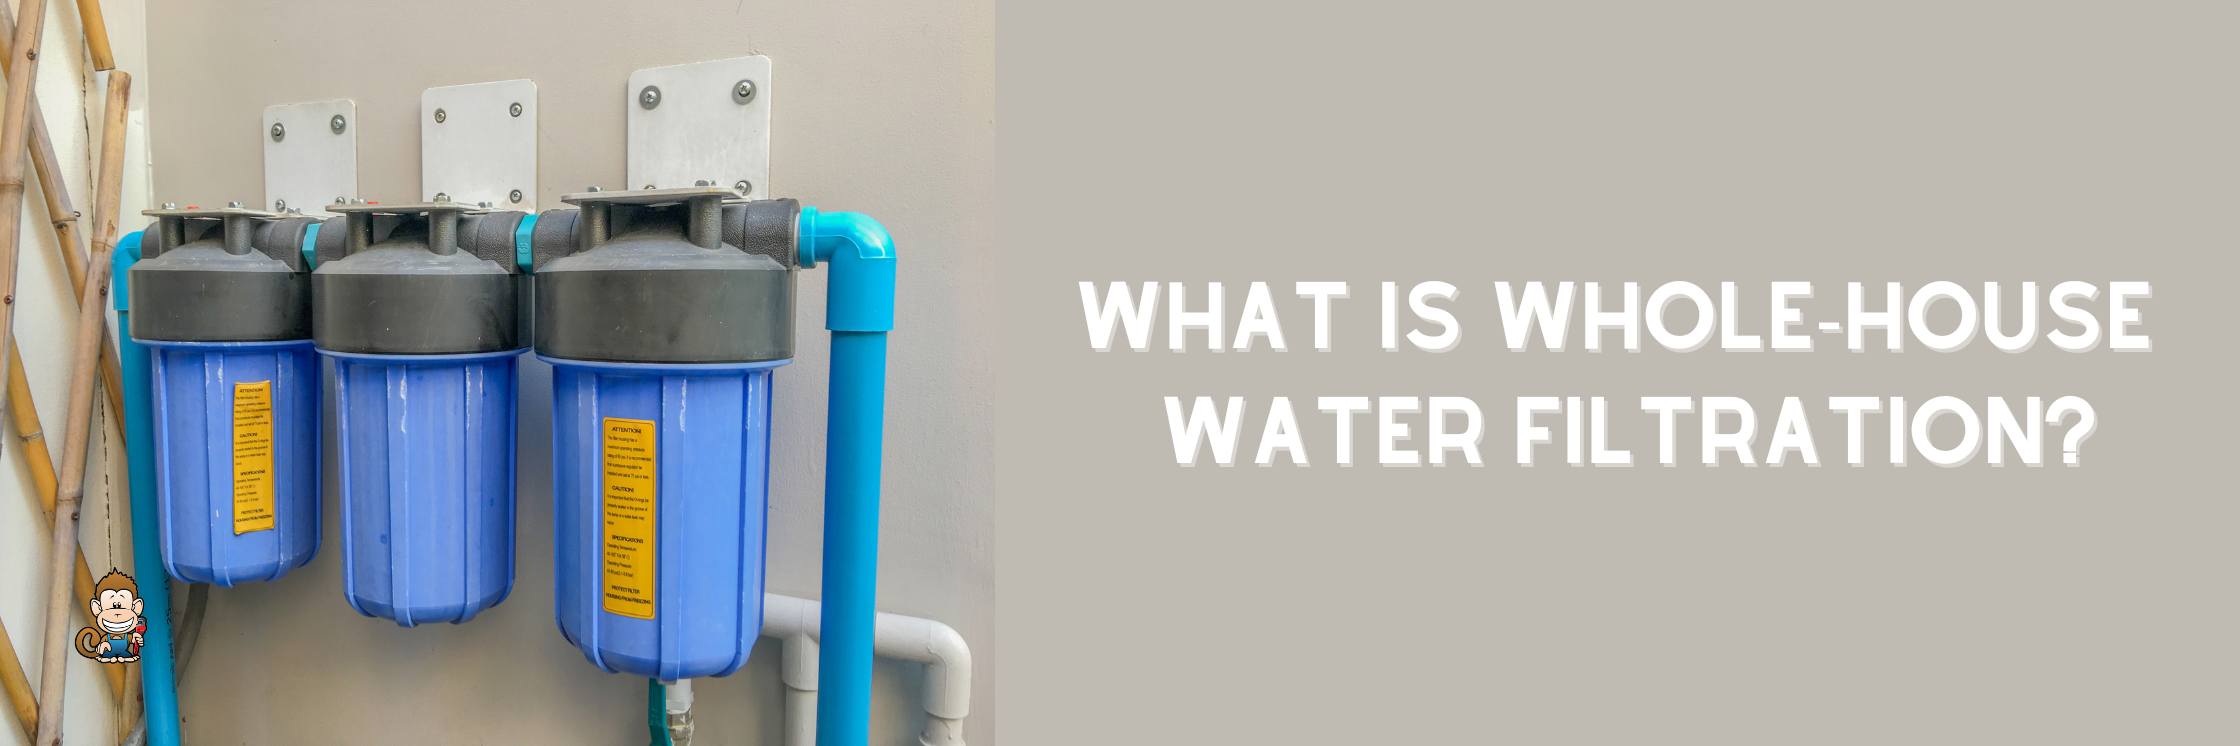 What Is Whole-House Water Filtration? (Video)